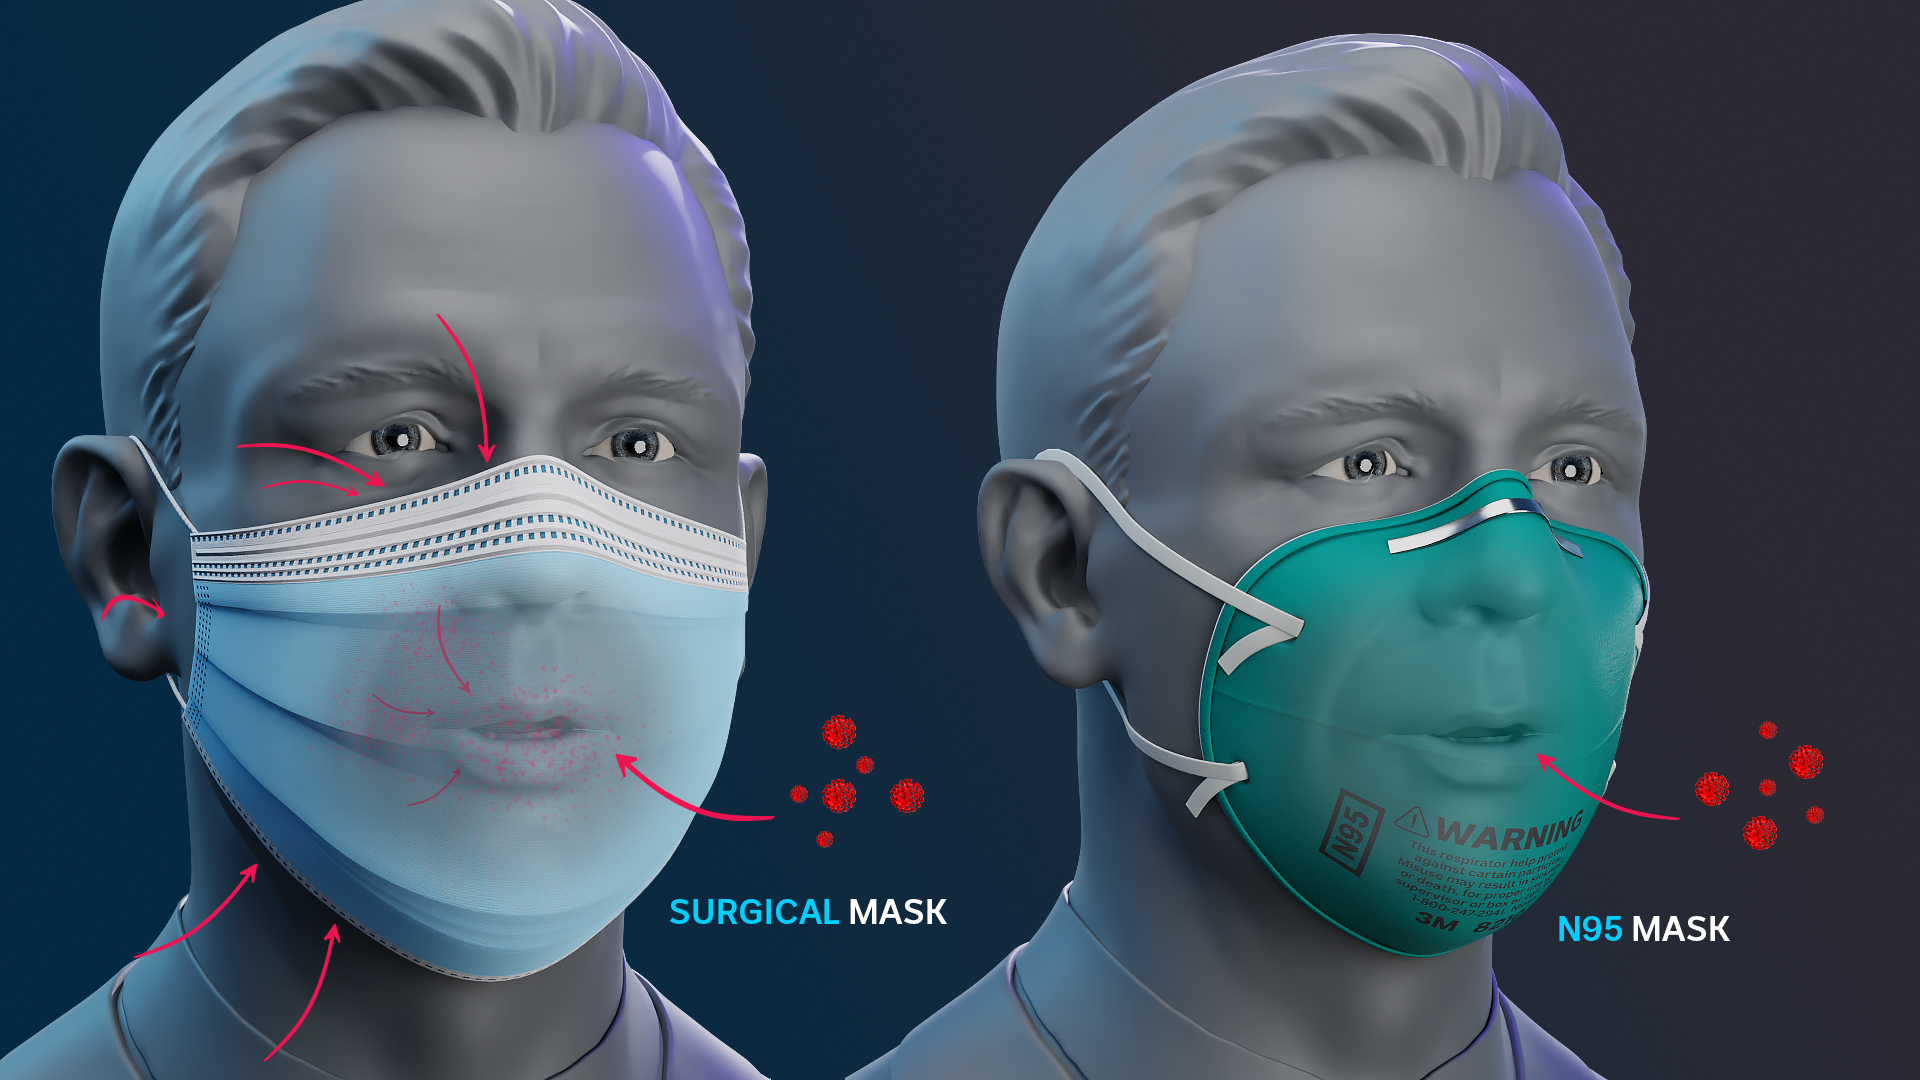 An illustration shows the difference between a surgical mask and a P2 or N95 mask.